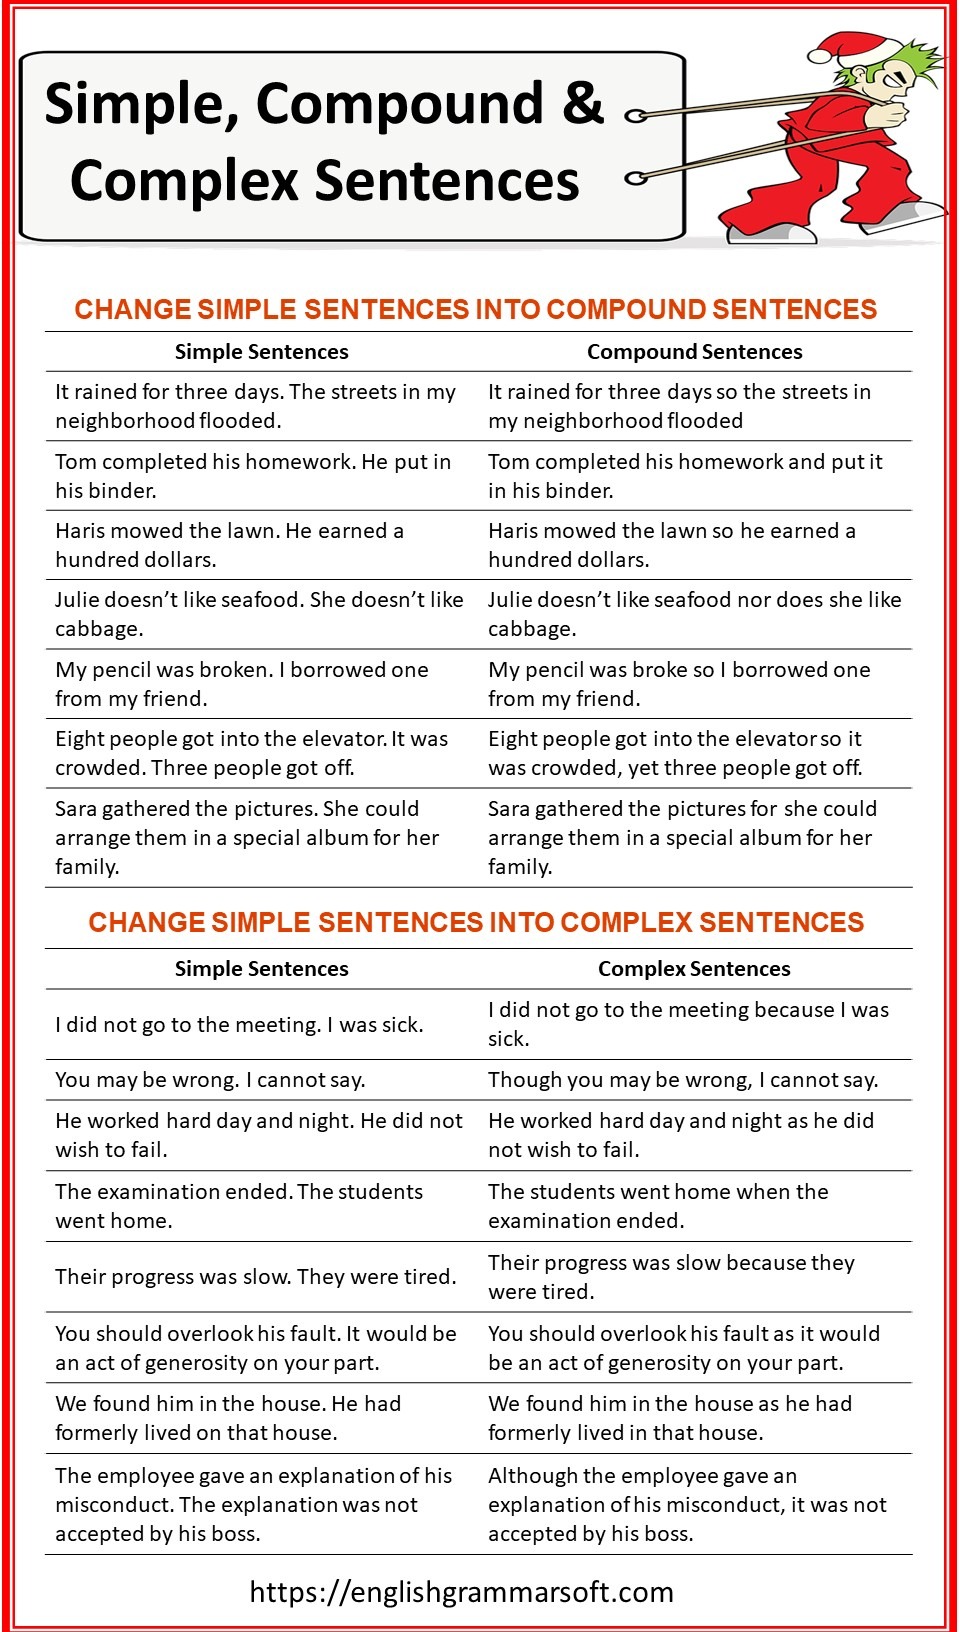 Simple Compound And Complex Sentences Explained With Examples 